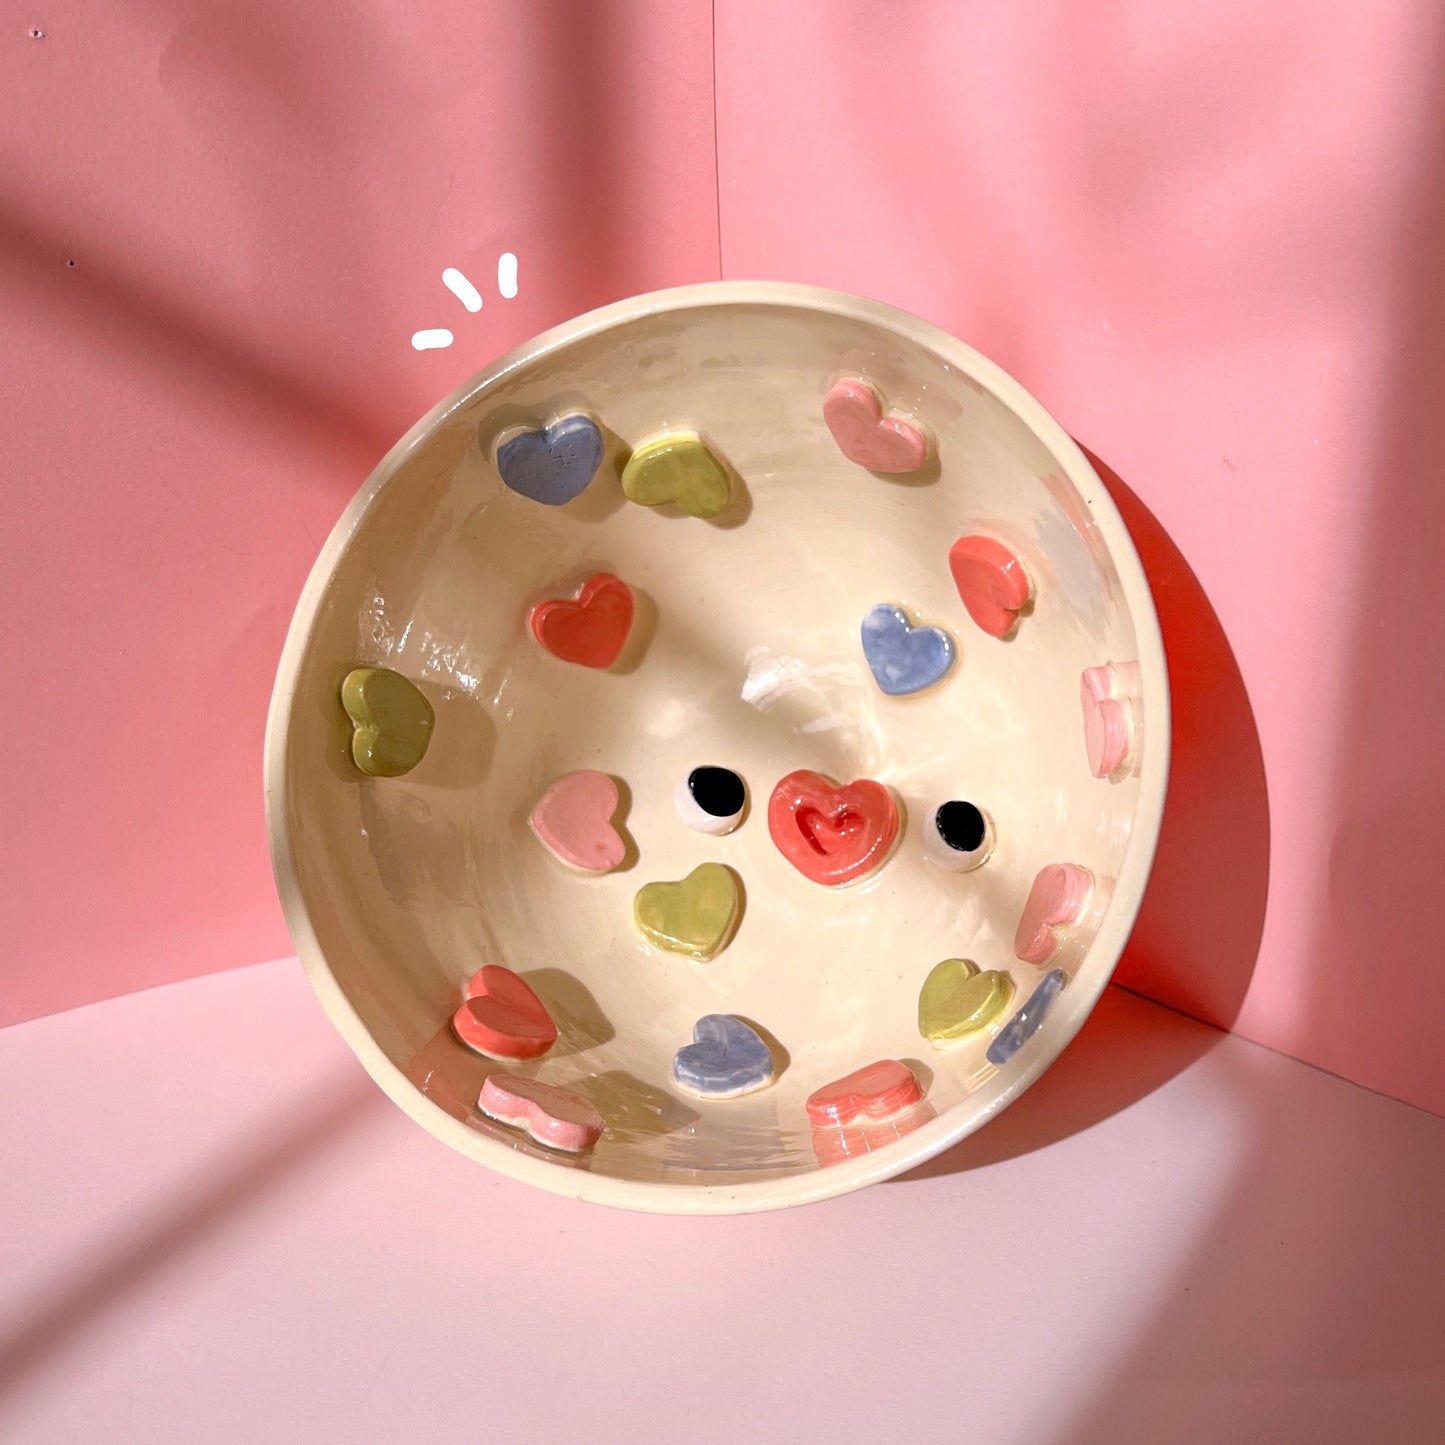 Candy heart cereal bowl